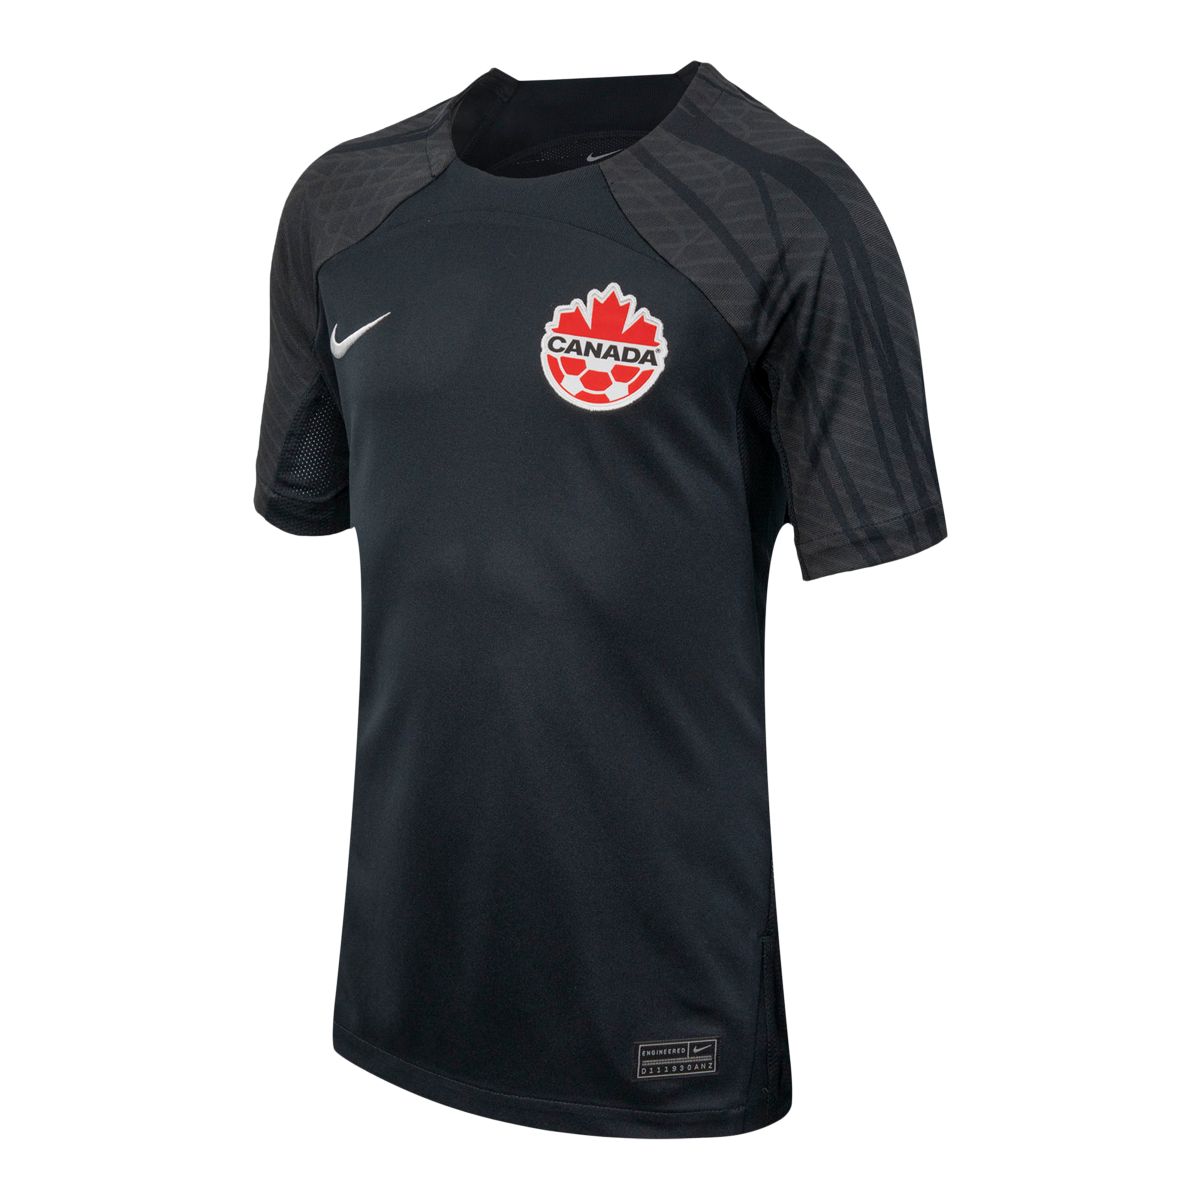 Image of Youth Canada Nike Soccer Replica 23 Jersey